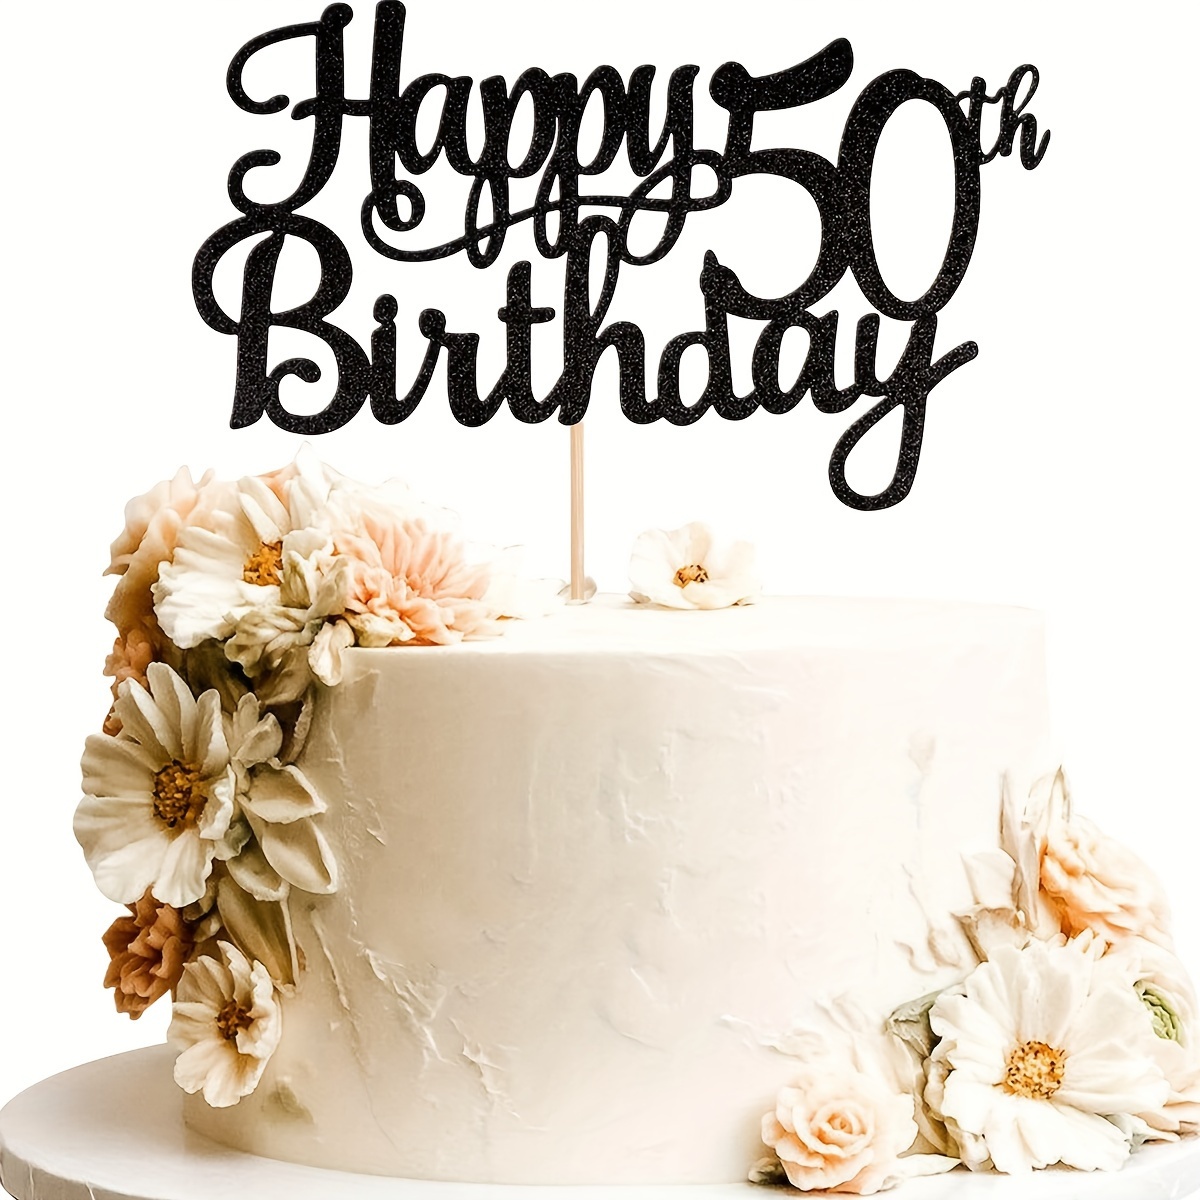 50 & Fabulous Cake Topper, 50th Birthday Party Decorations, 50th